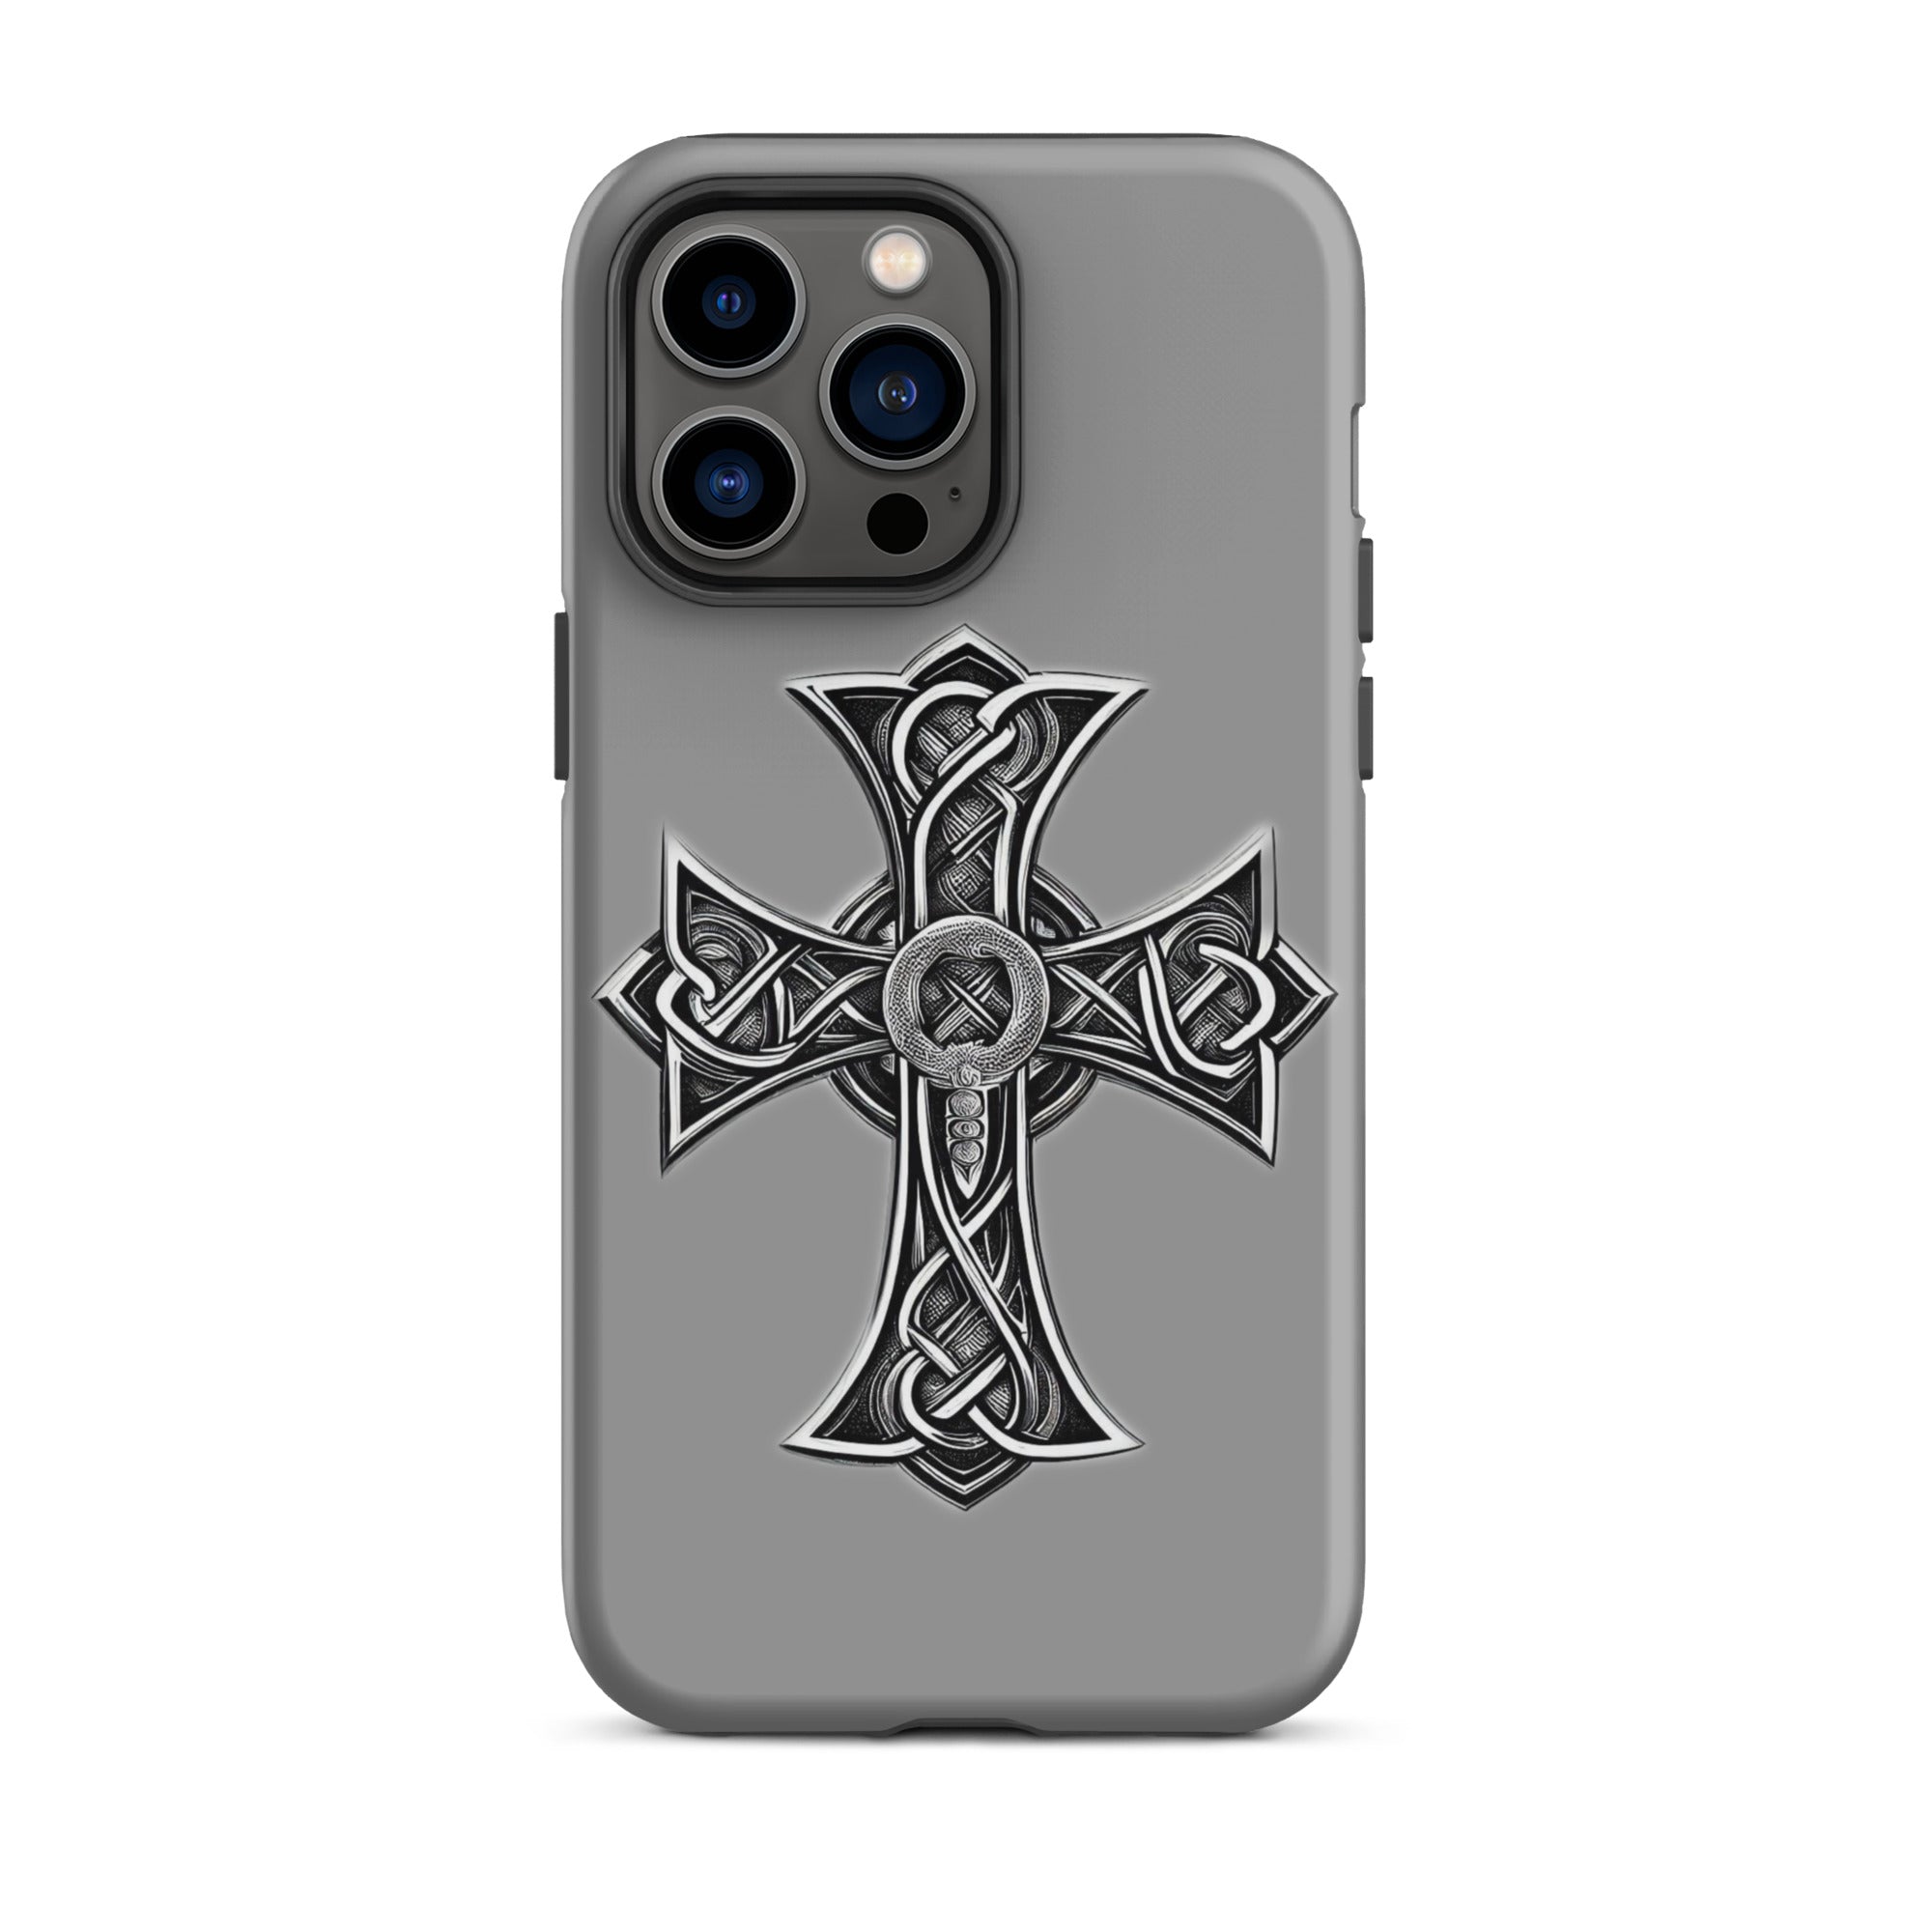 tough-case-for-iphone-matte-iphone-14-pro-max-front-656384771450e.jpg